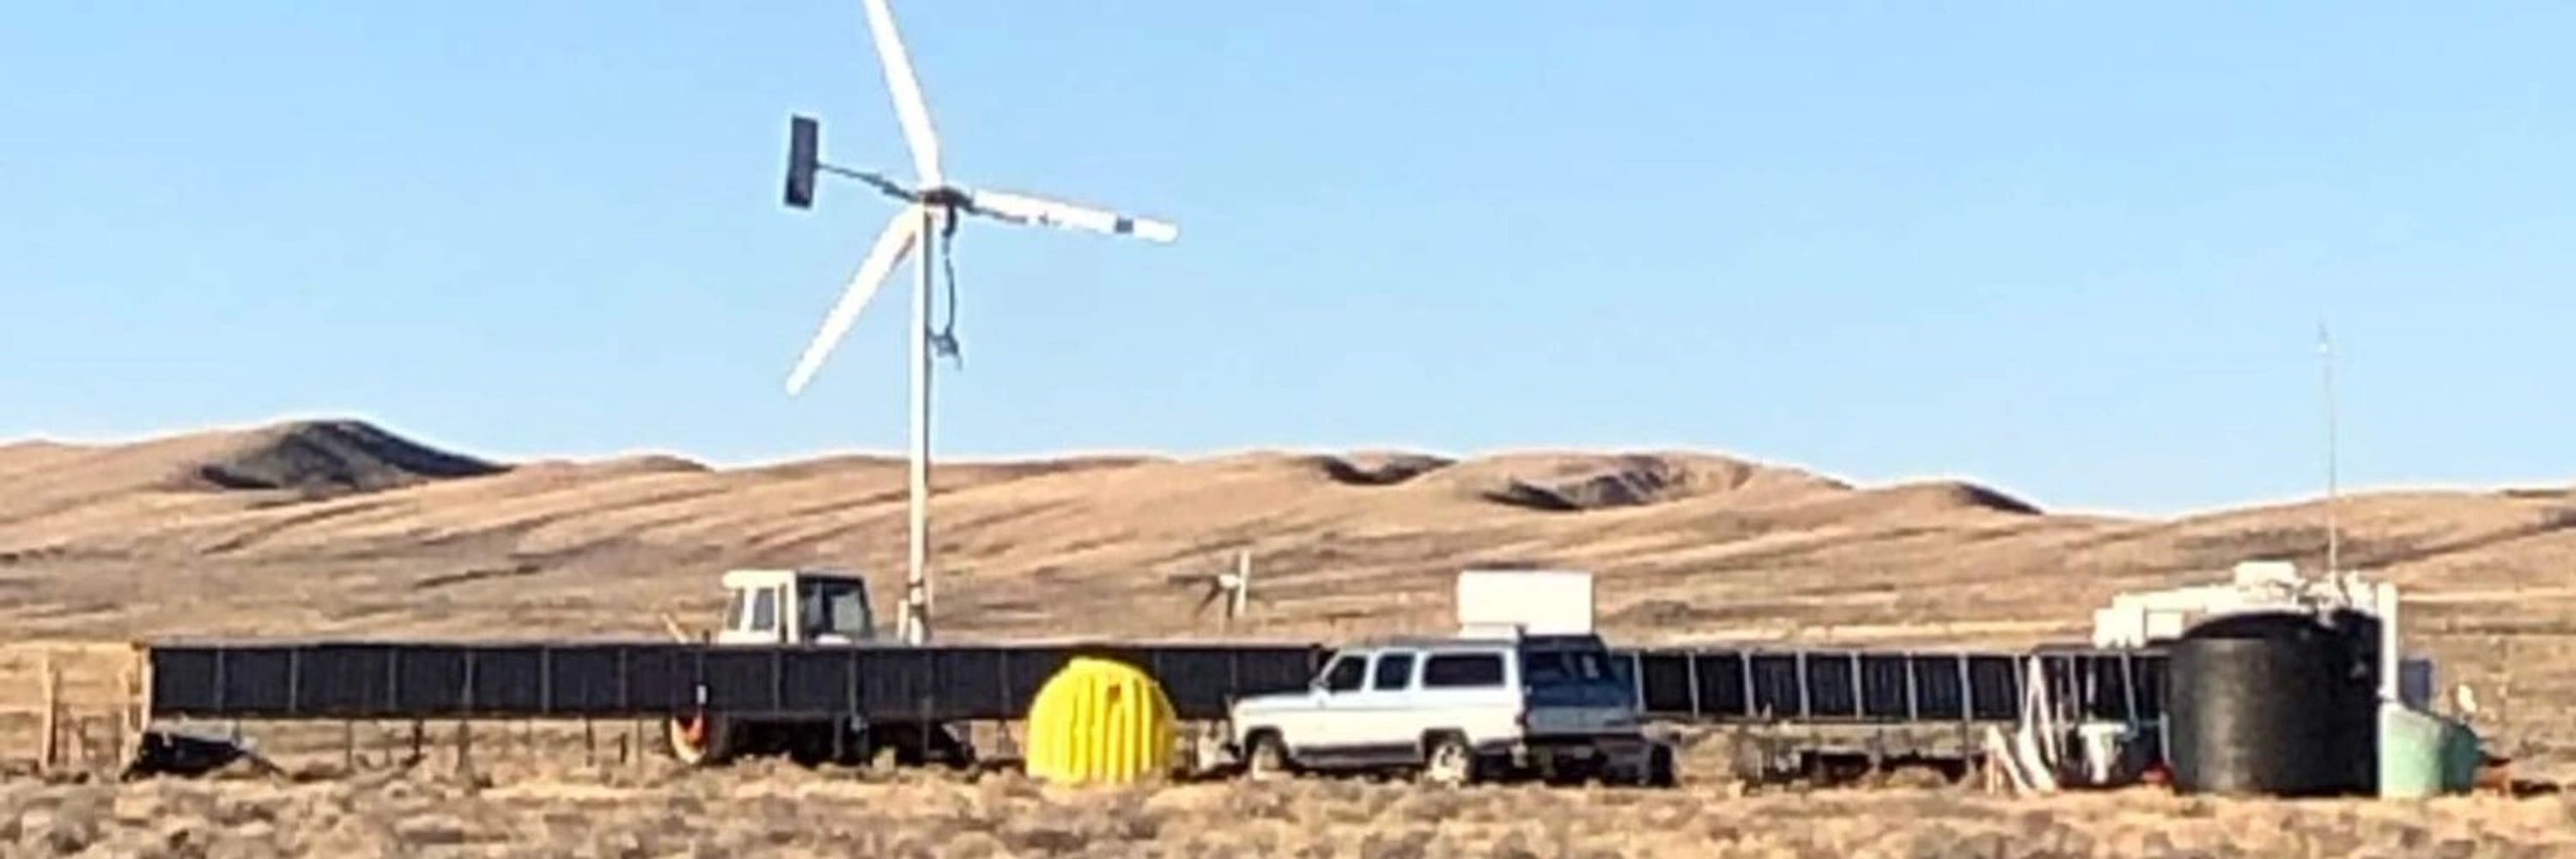 Photograph of 100 Acres Ranch. A bunch of solar panels, a windmill, a tractor. Mountains behind.